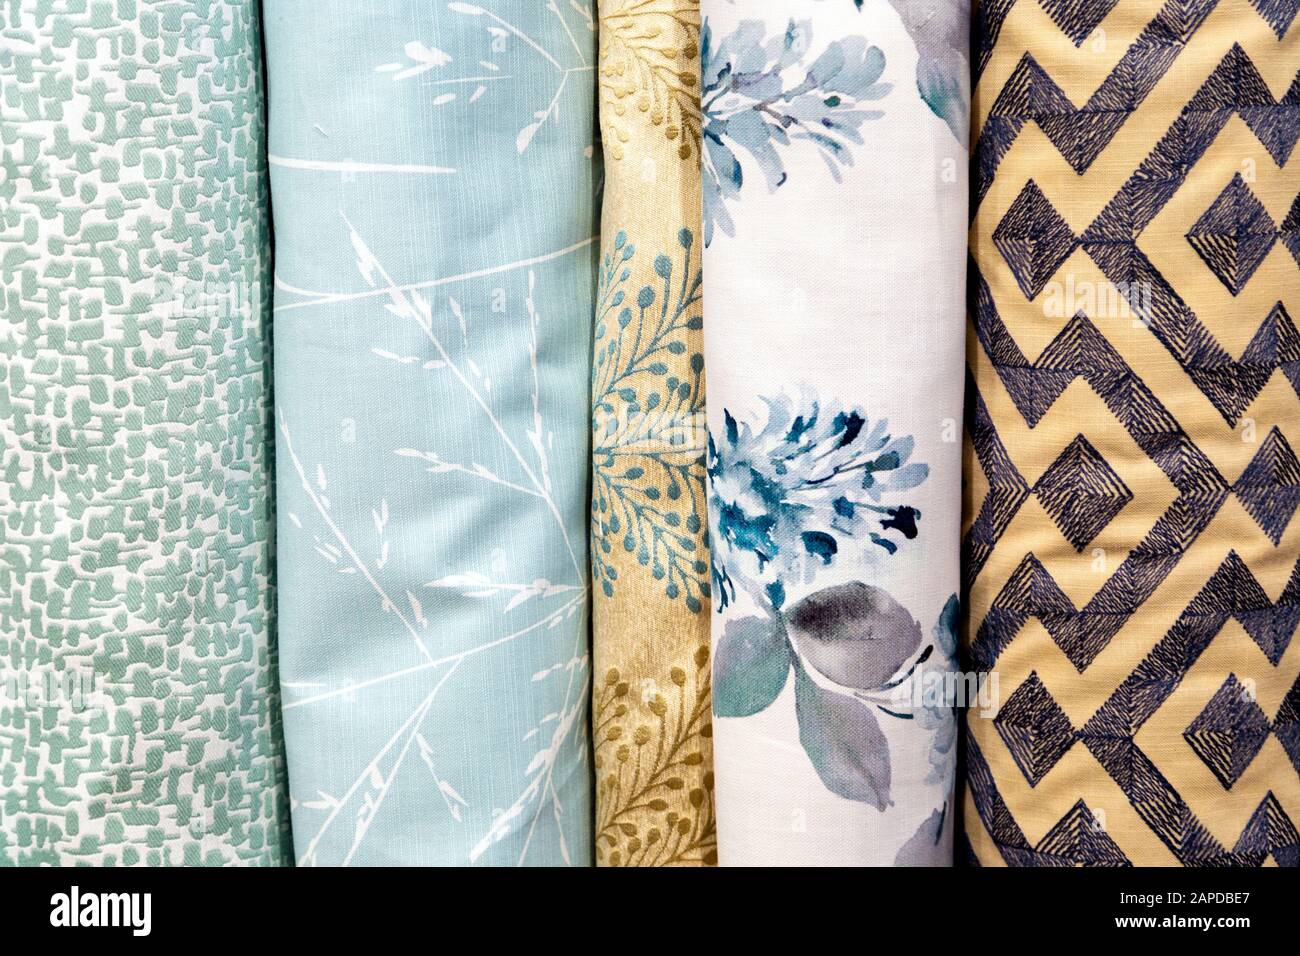 Rolls of printed fabric selection Stock Photo